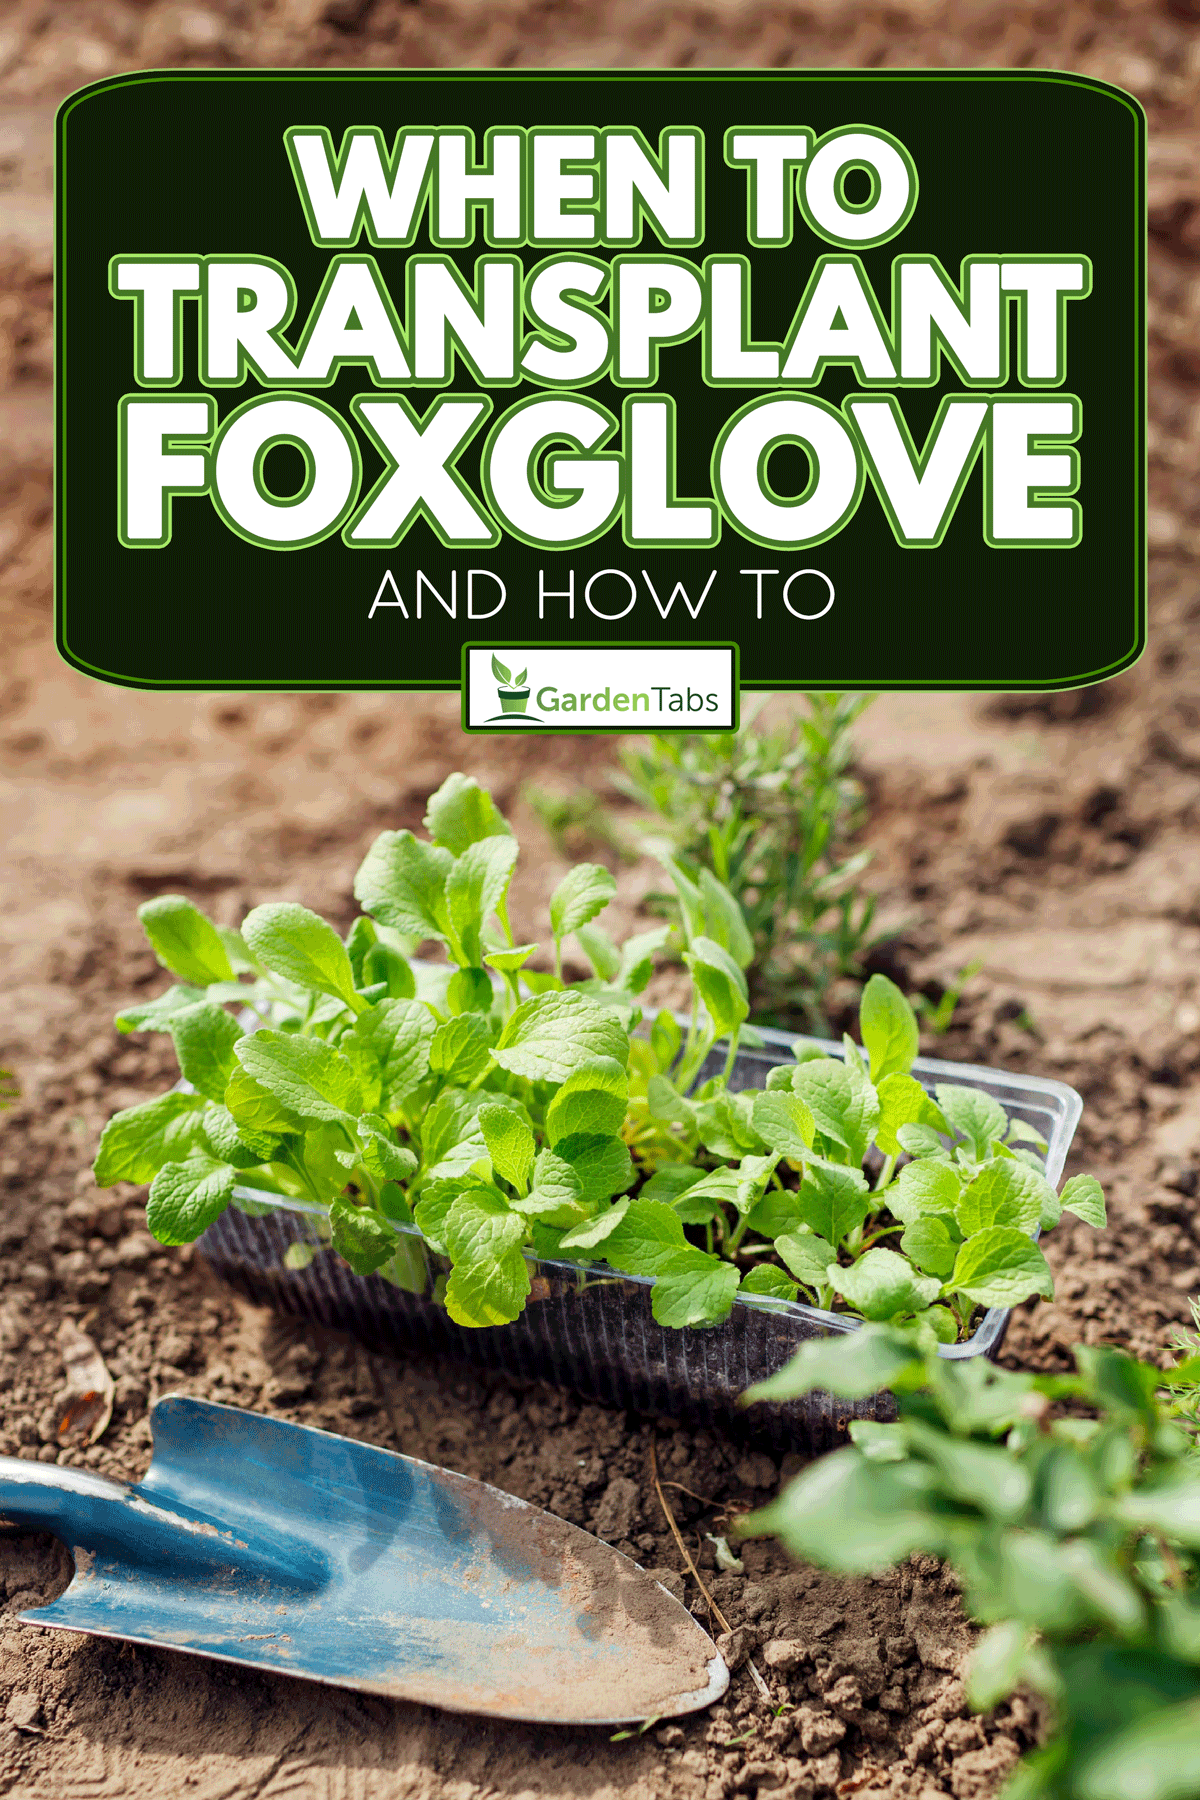 Transplanting foxglove seedlings into soil in summer garden using shovel, When To Transplant Foxglove [And How To]